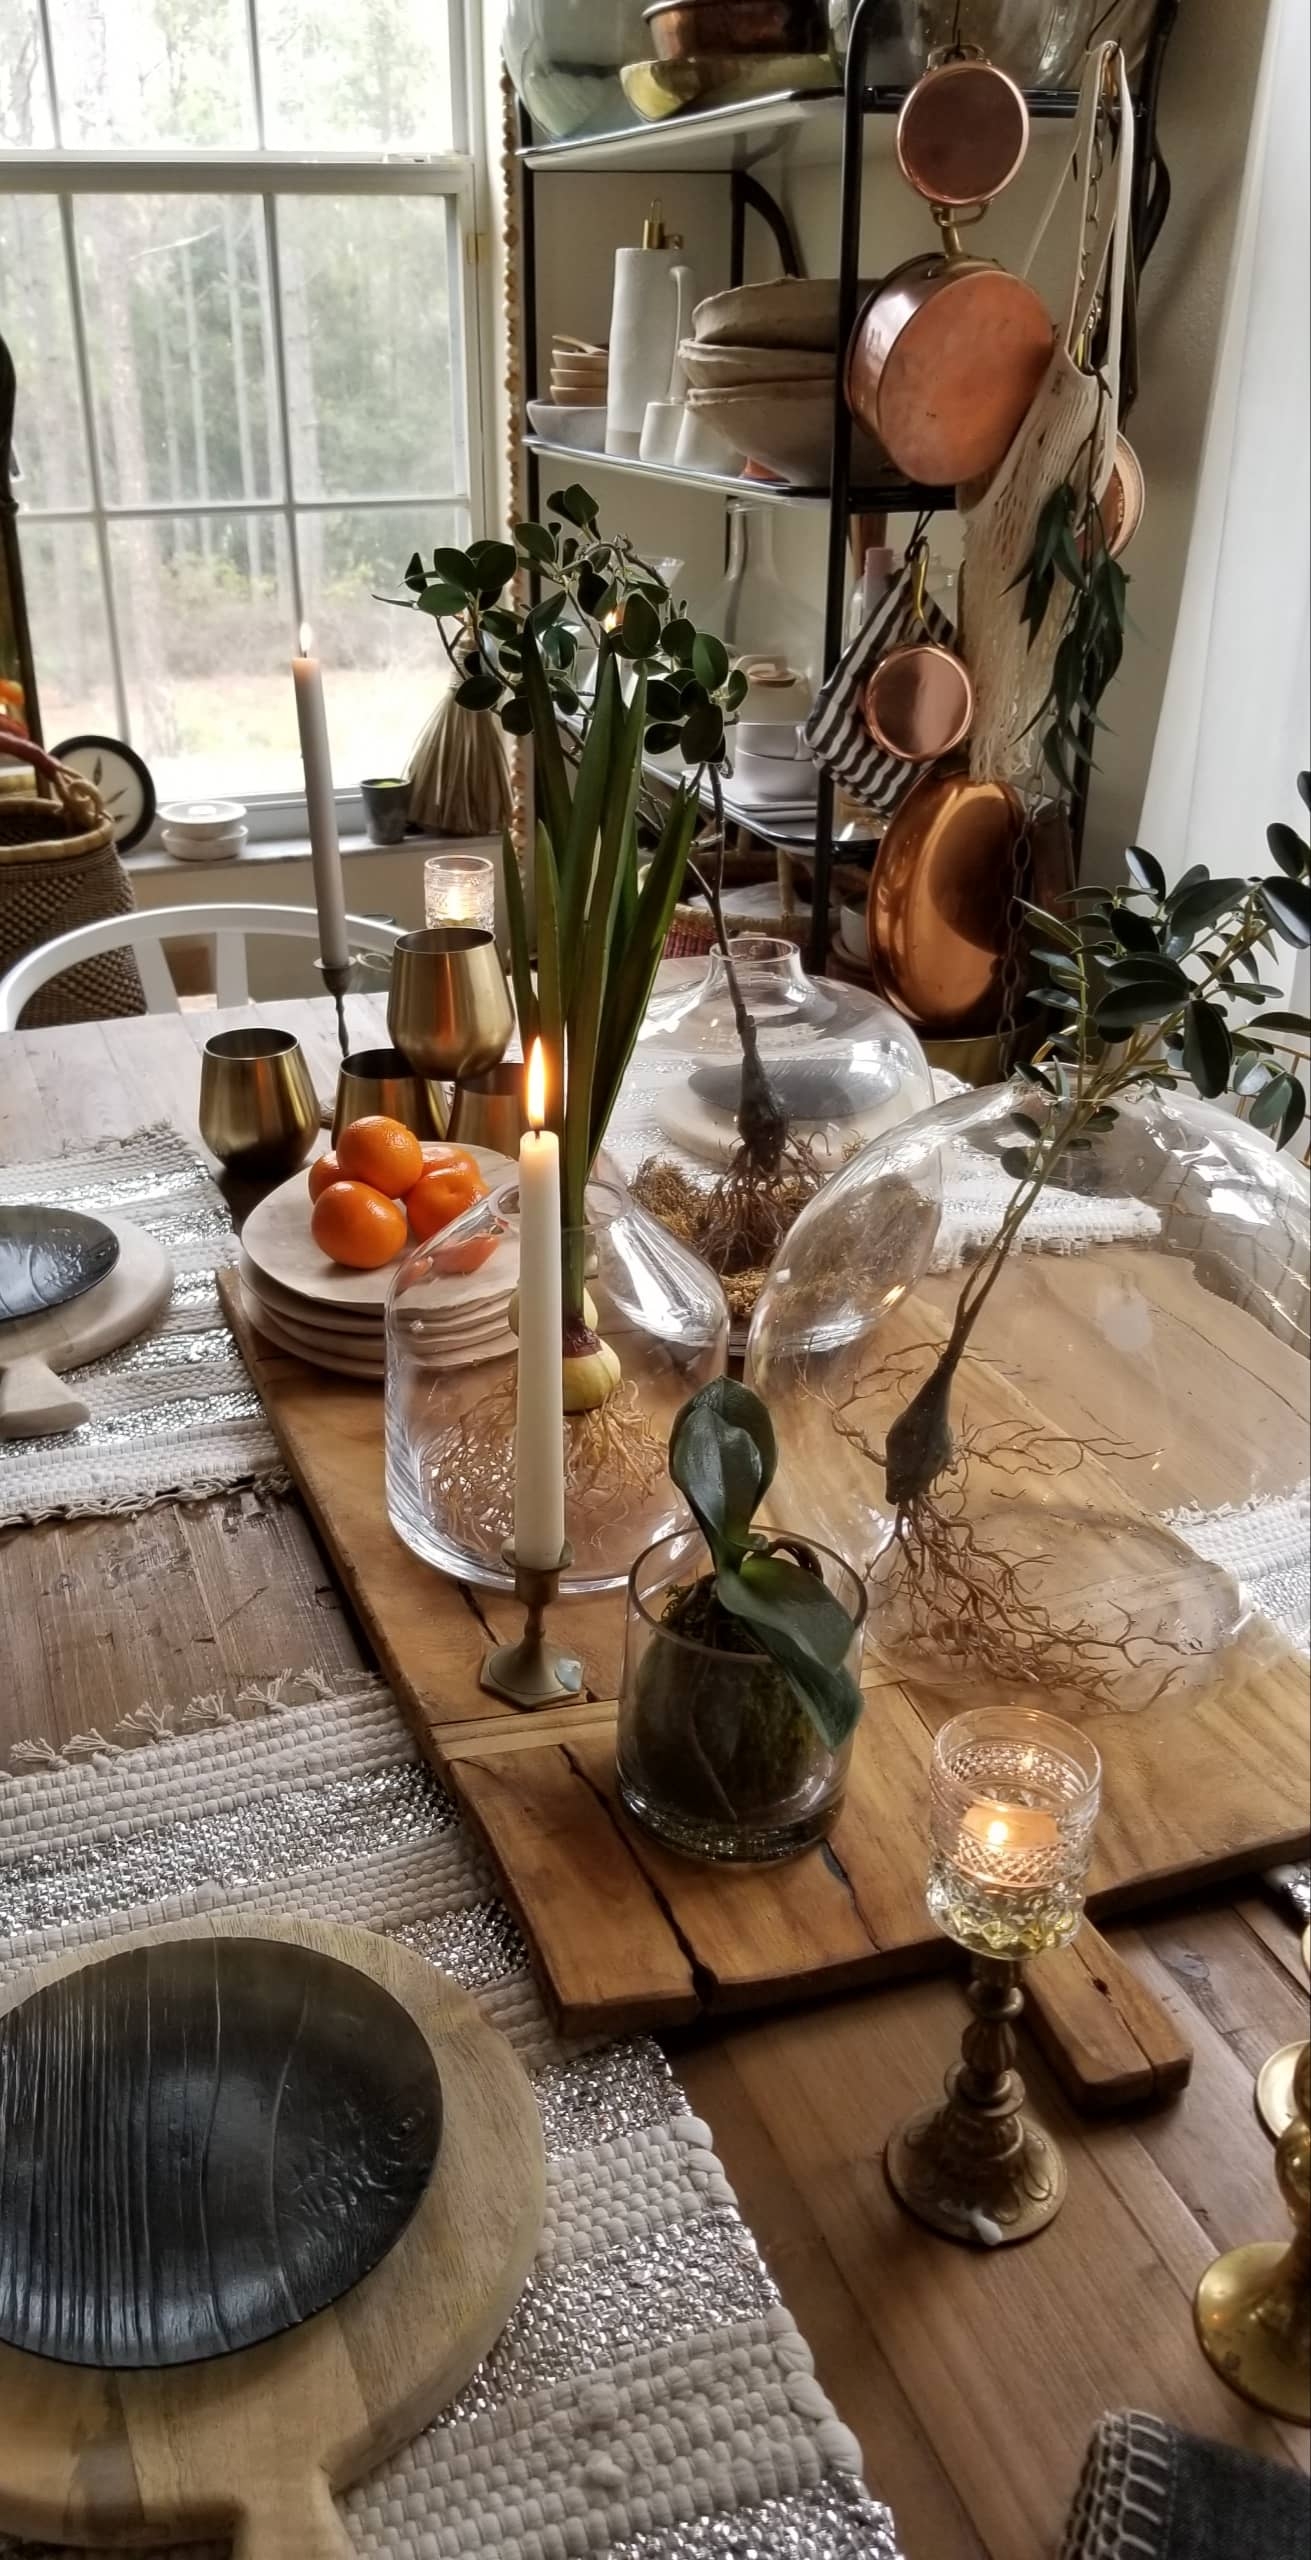 Hot New Decor Design Style 2019 Farmhouse Table Wood Glass Mixed Metals Candles Plants Scandinavian Boho Urban Chic Modern Rustic Dining Kitchen Tablescape Breadboard